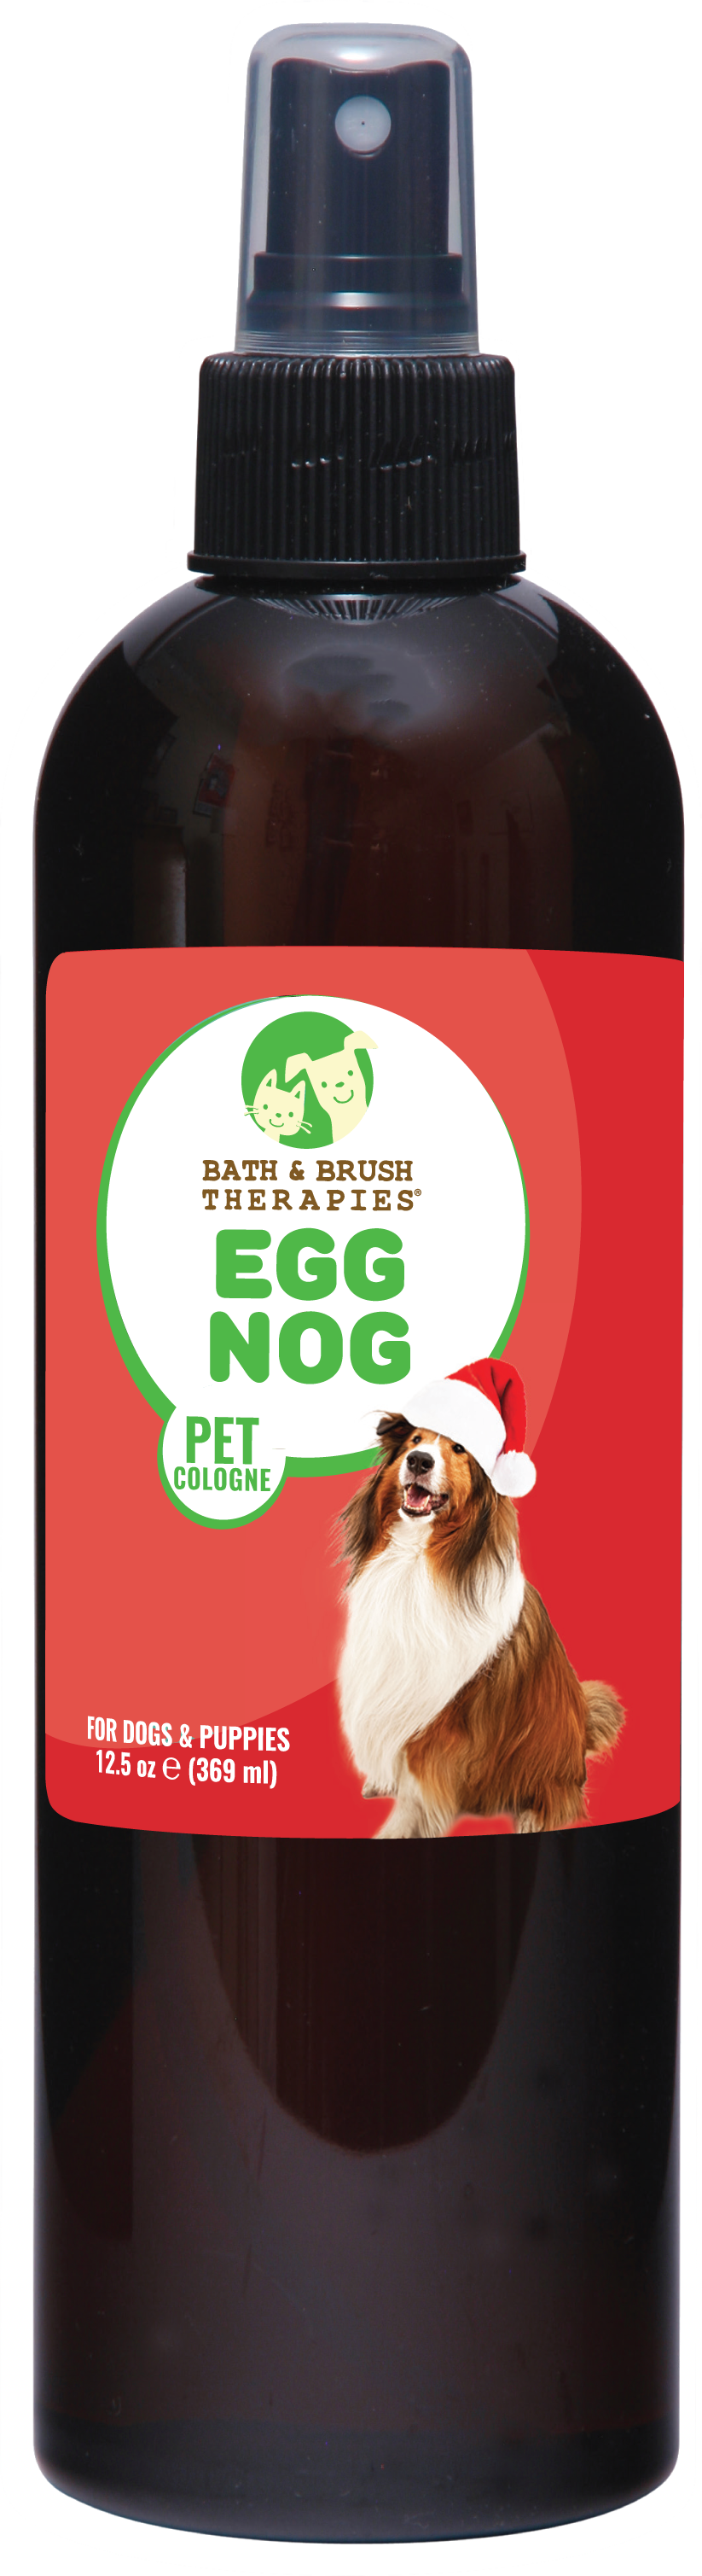 Hot Buttered Rum Pet Cologne | Bath & Brush Therapies®